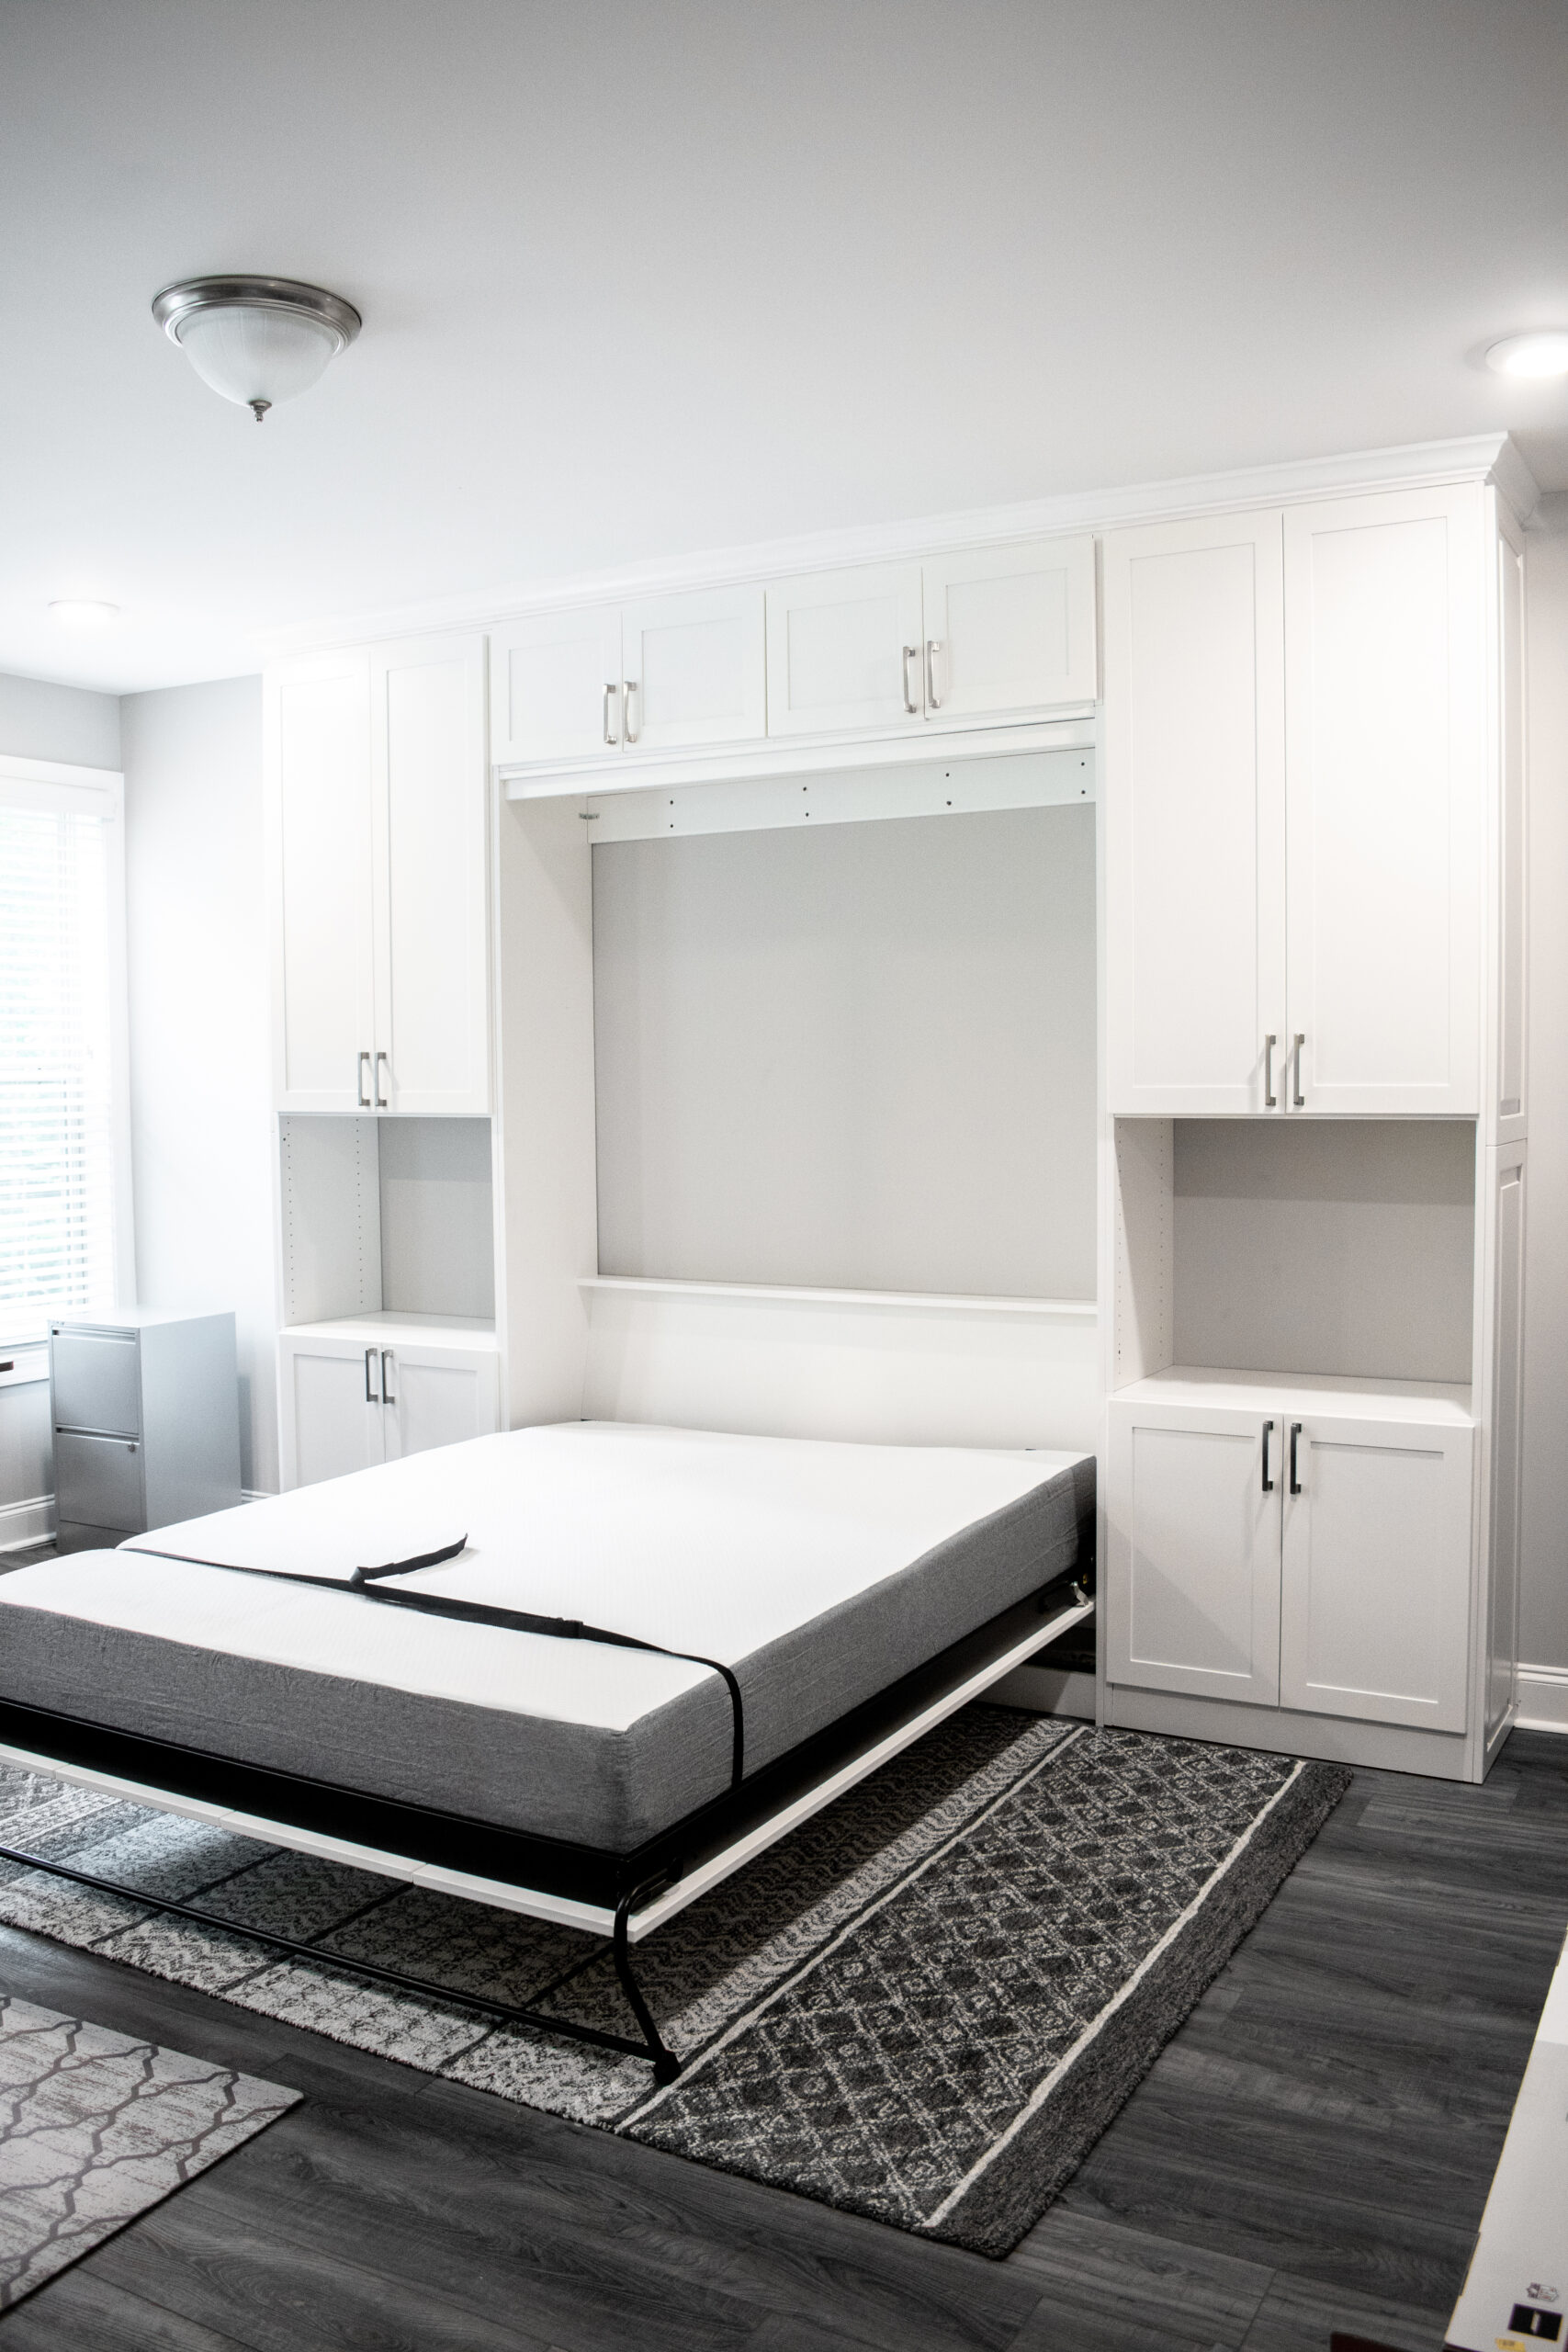 White shaker murphy bed by Custom Closets of GA. It features decorative side panels, overhead cabinets, and lower cabinets with landing spaces, and it is designed for a full-size mattress.